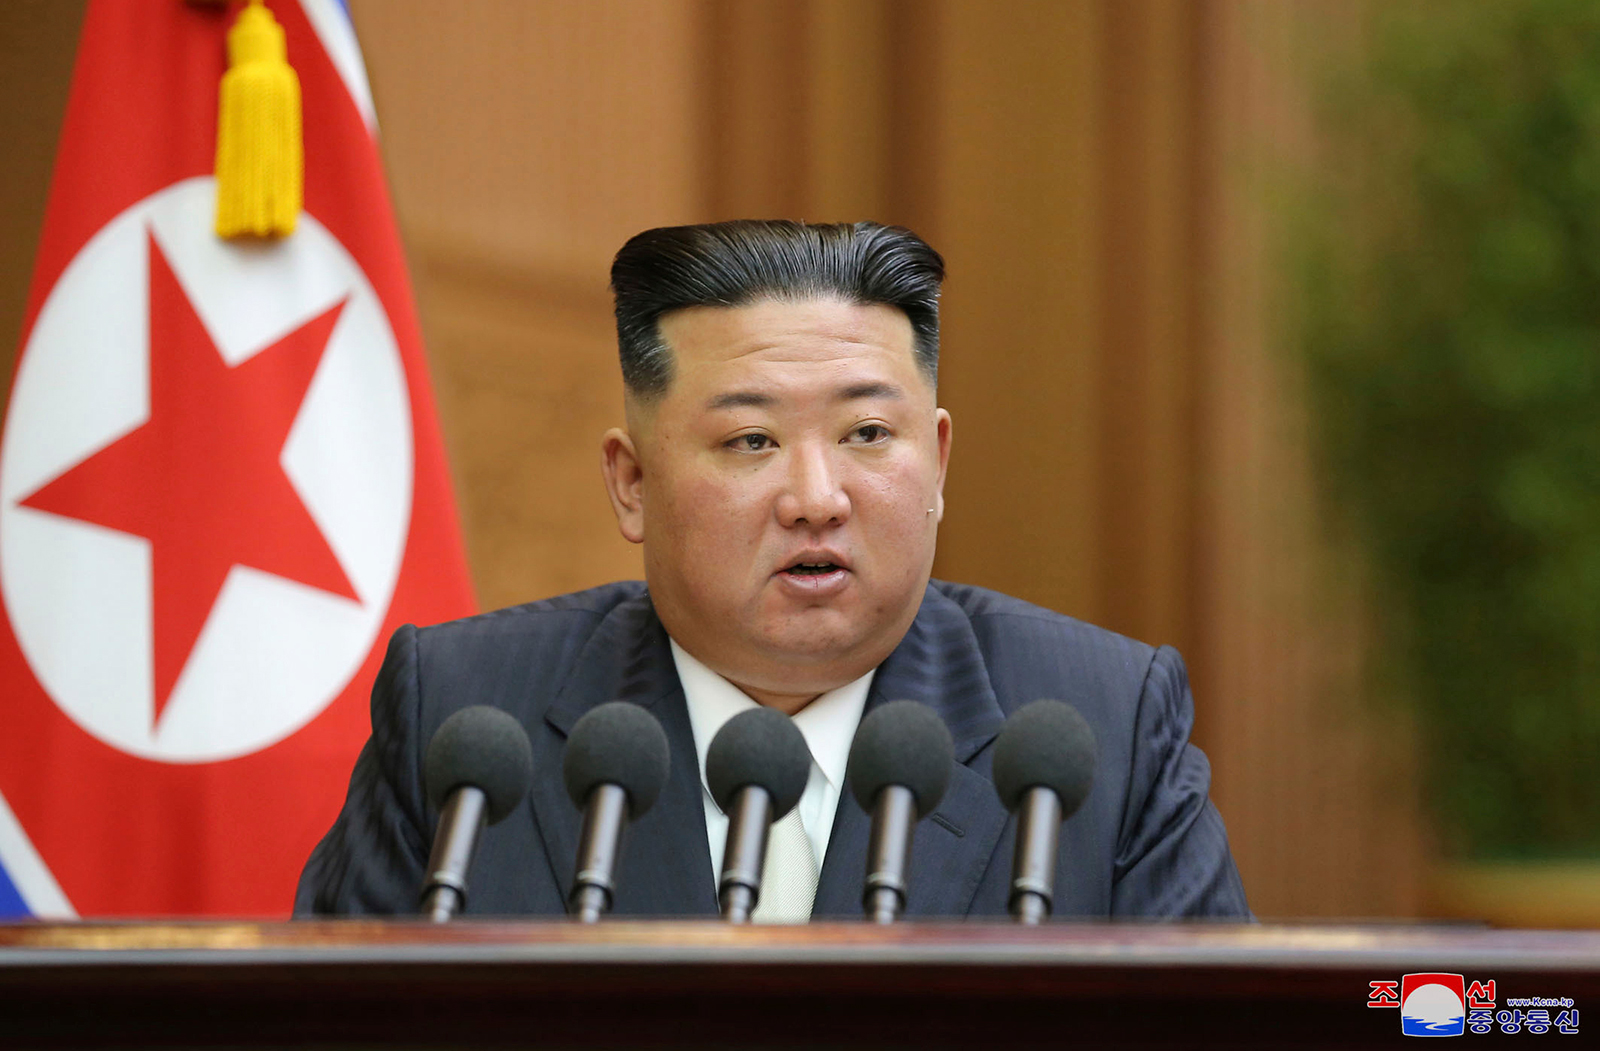 FILE - This photo provided by the North Korean government shows North Korean leader Kim Jong Un del...